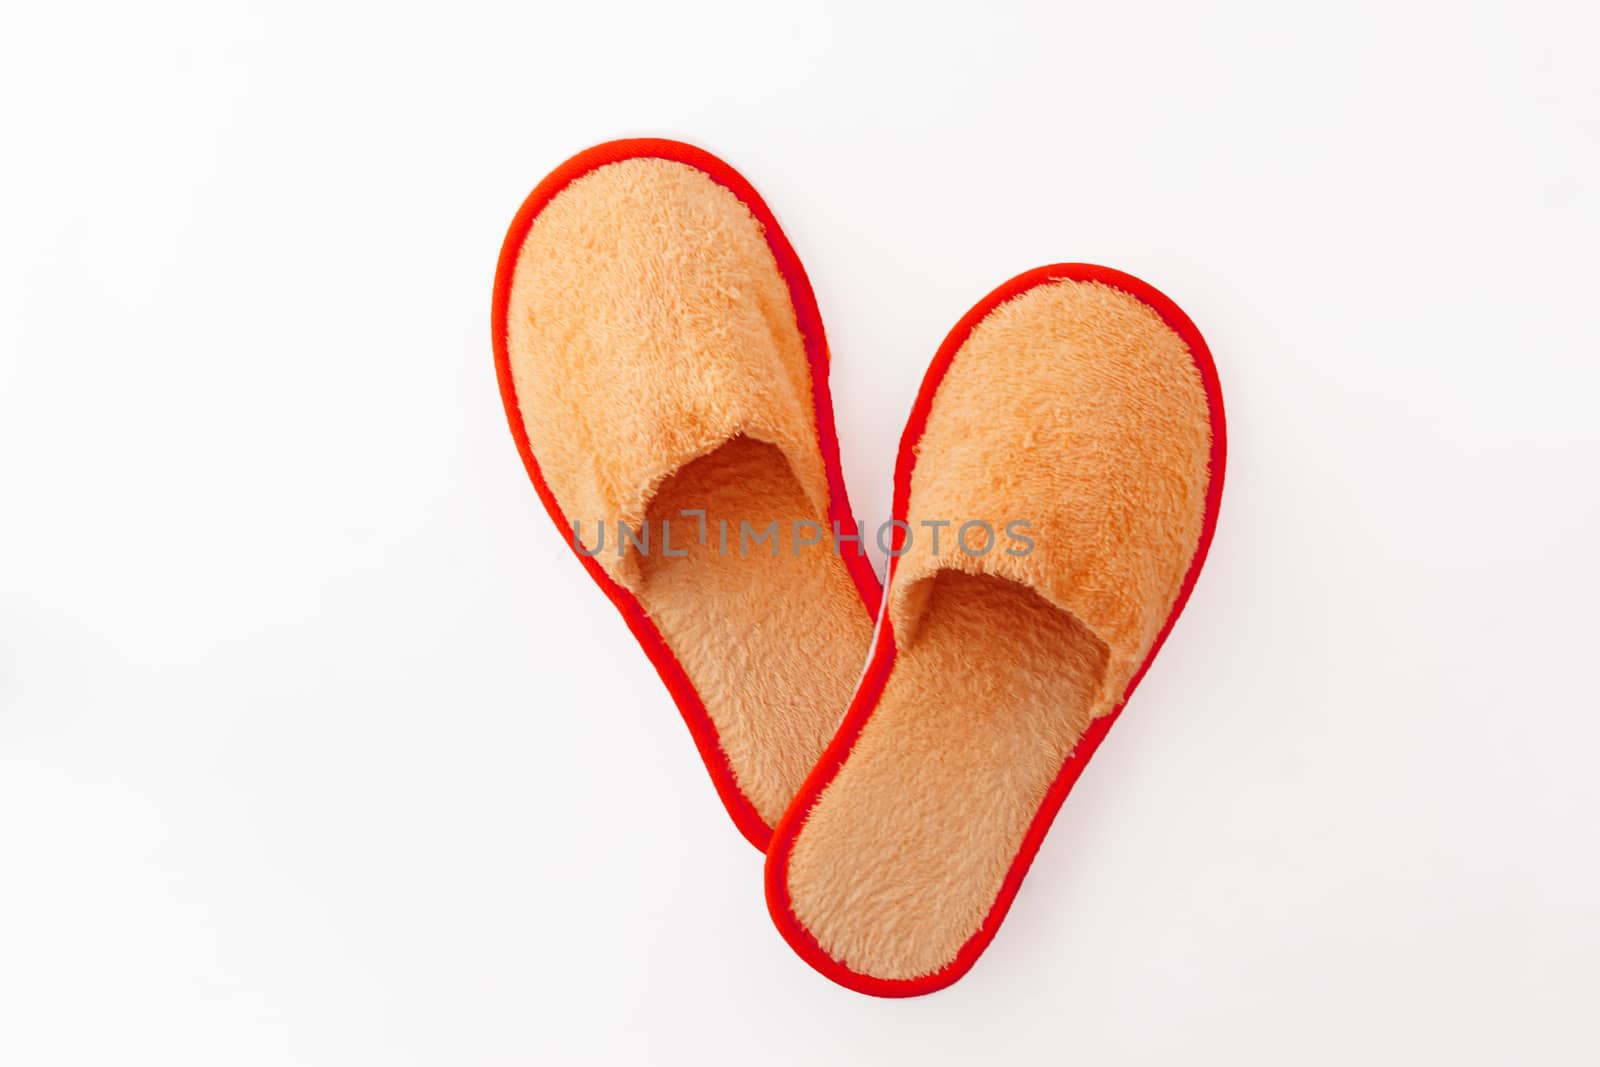 multicolored soft fluffy house slippers isolated on white background.